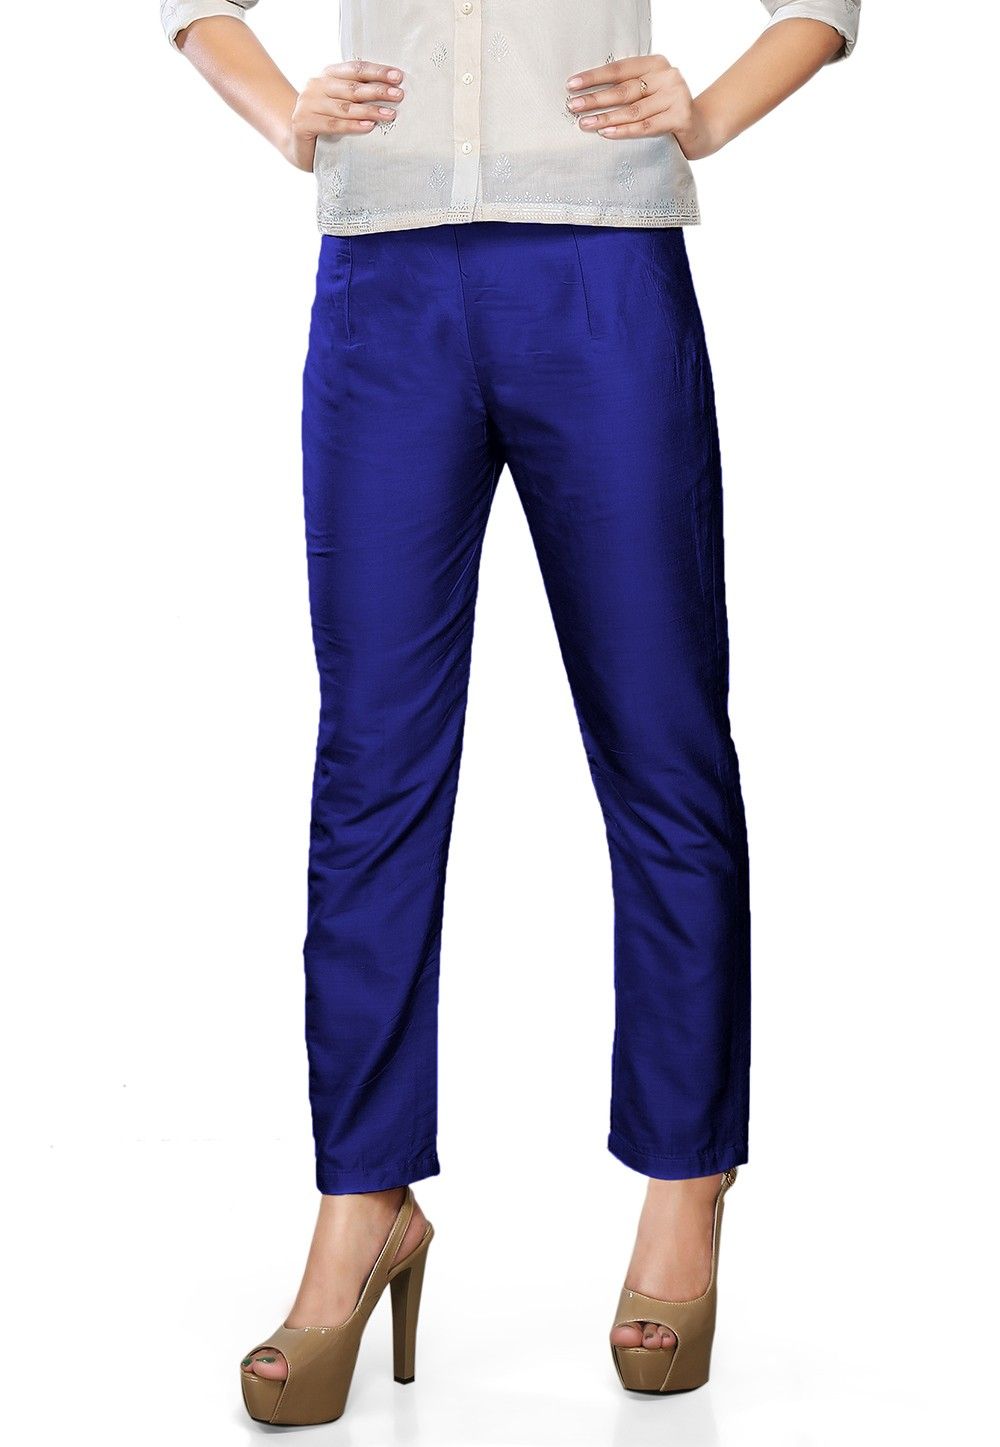 Aggregate more than 145 royal blue trousers womens super hot - camera ...